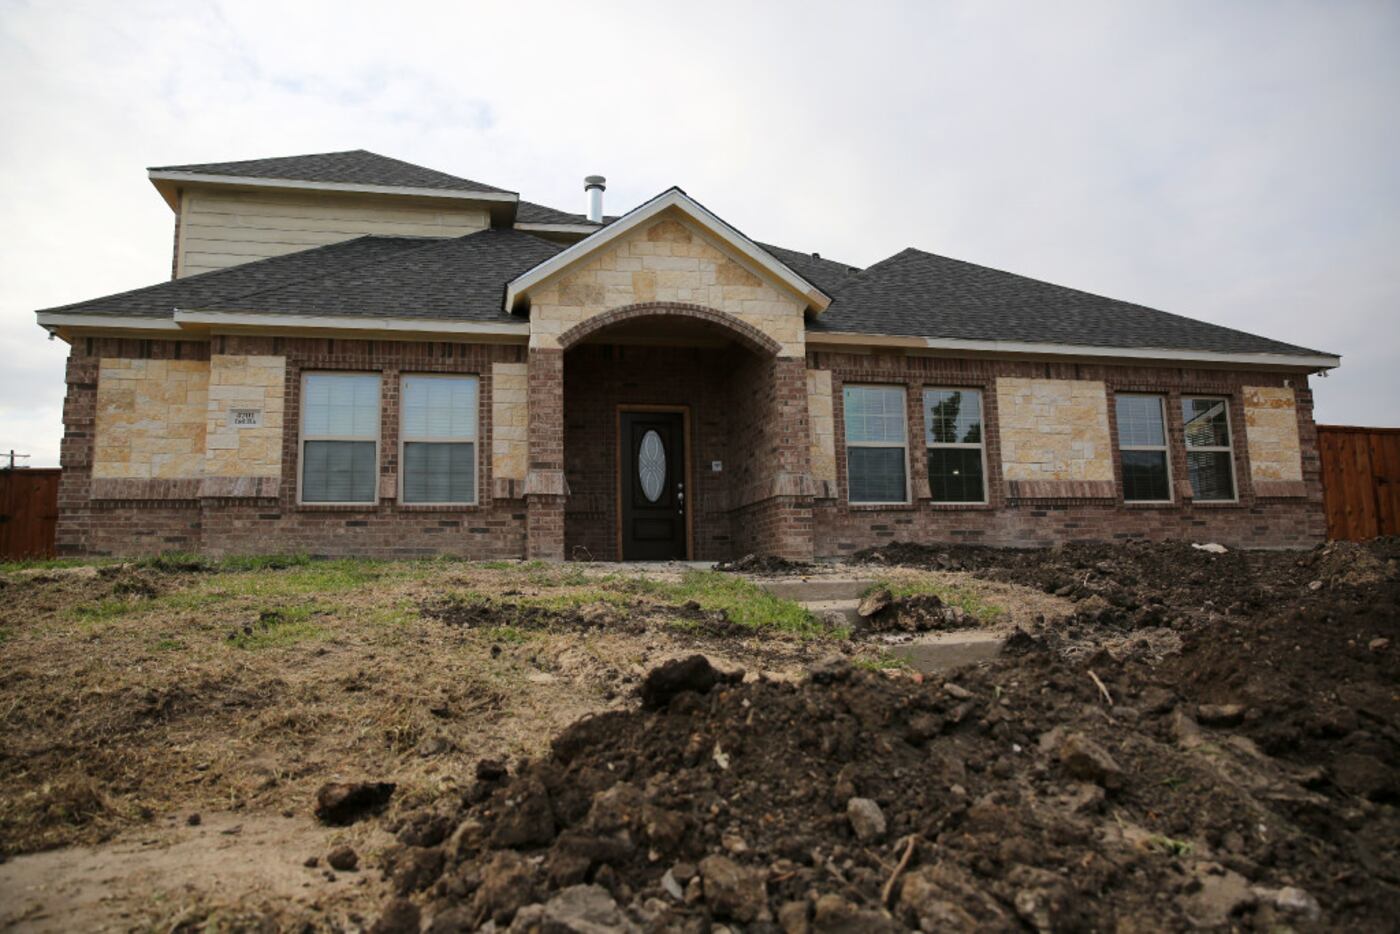 The Salazars moved back into their home, which was damaged after the Dec. 26, 2015, tornado....